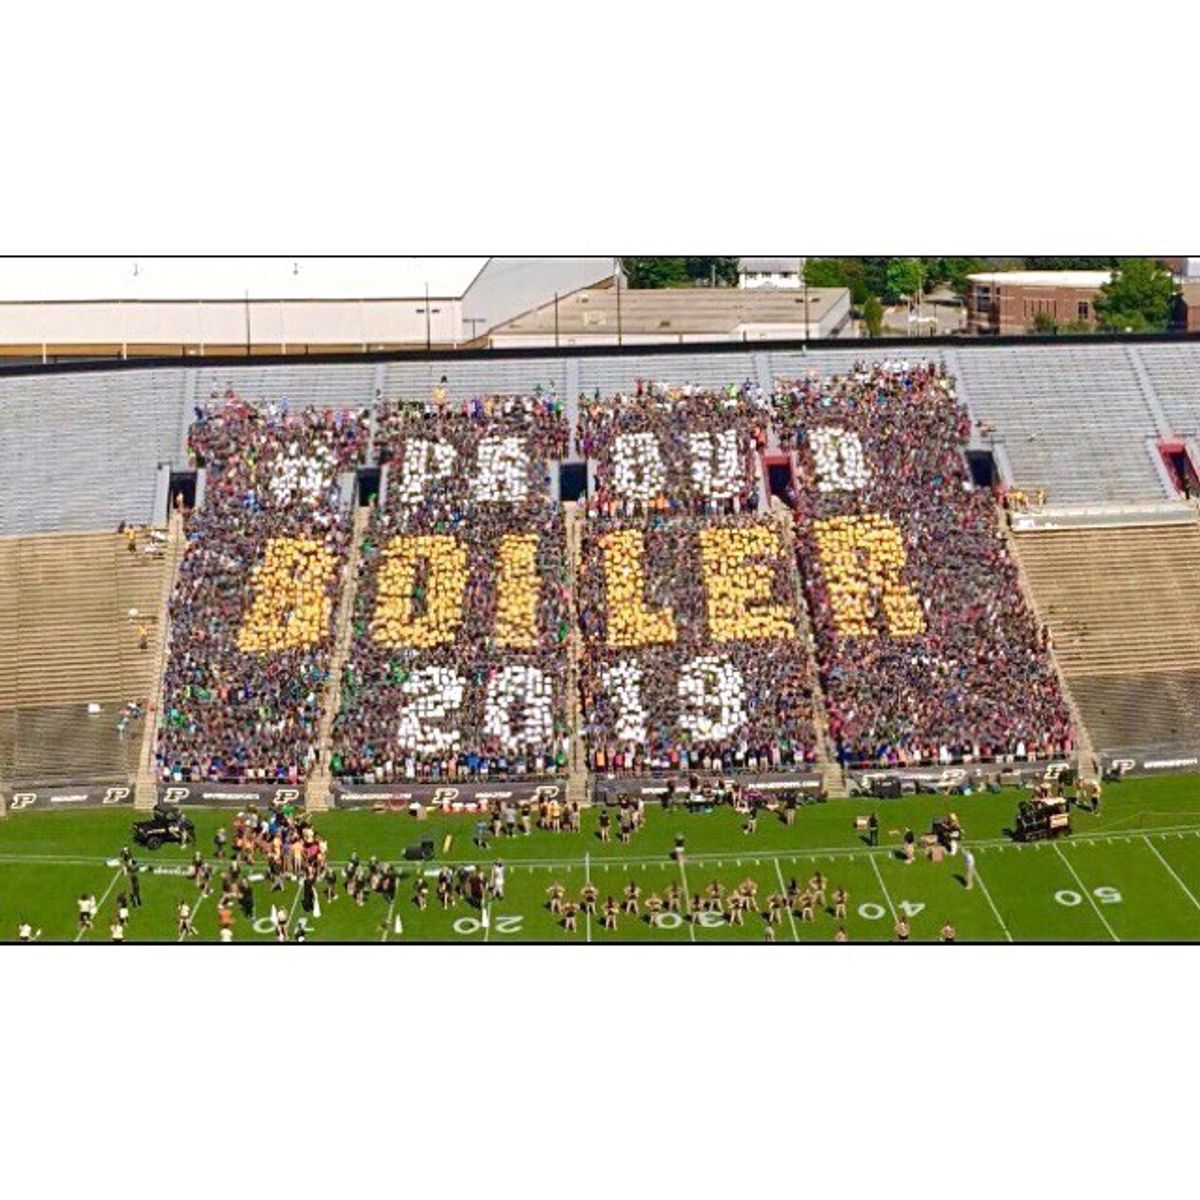 Hey Purdue, You Suck. Sincerely, A Purdue Student